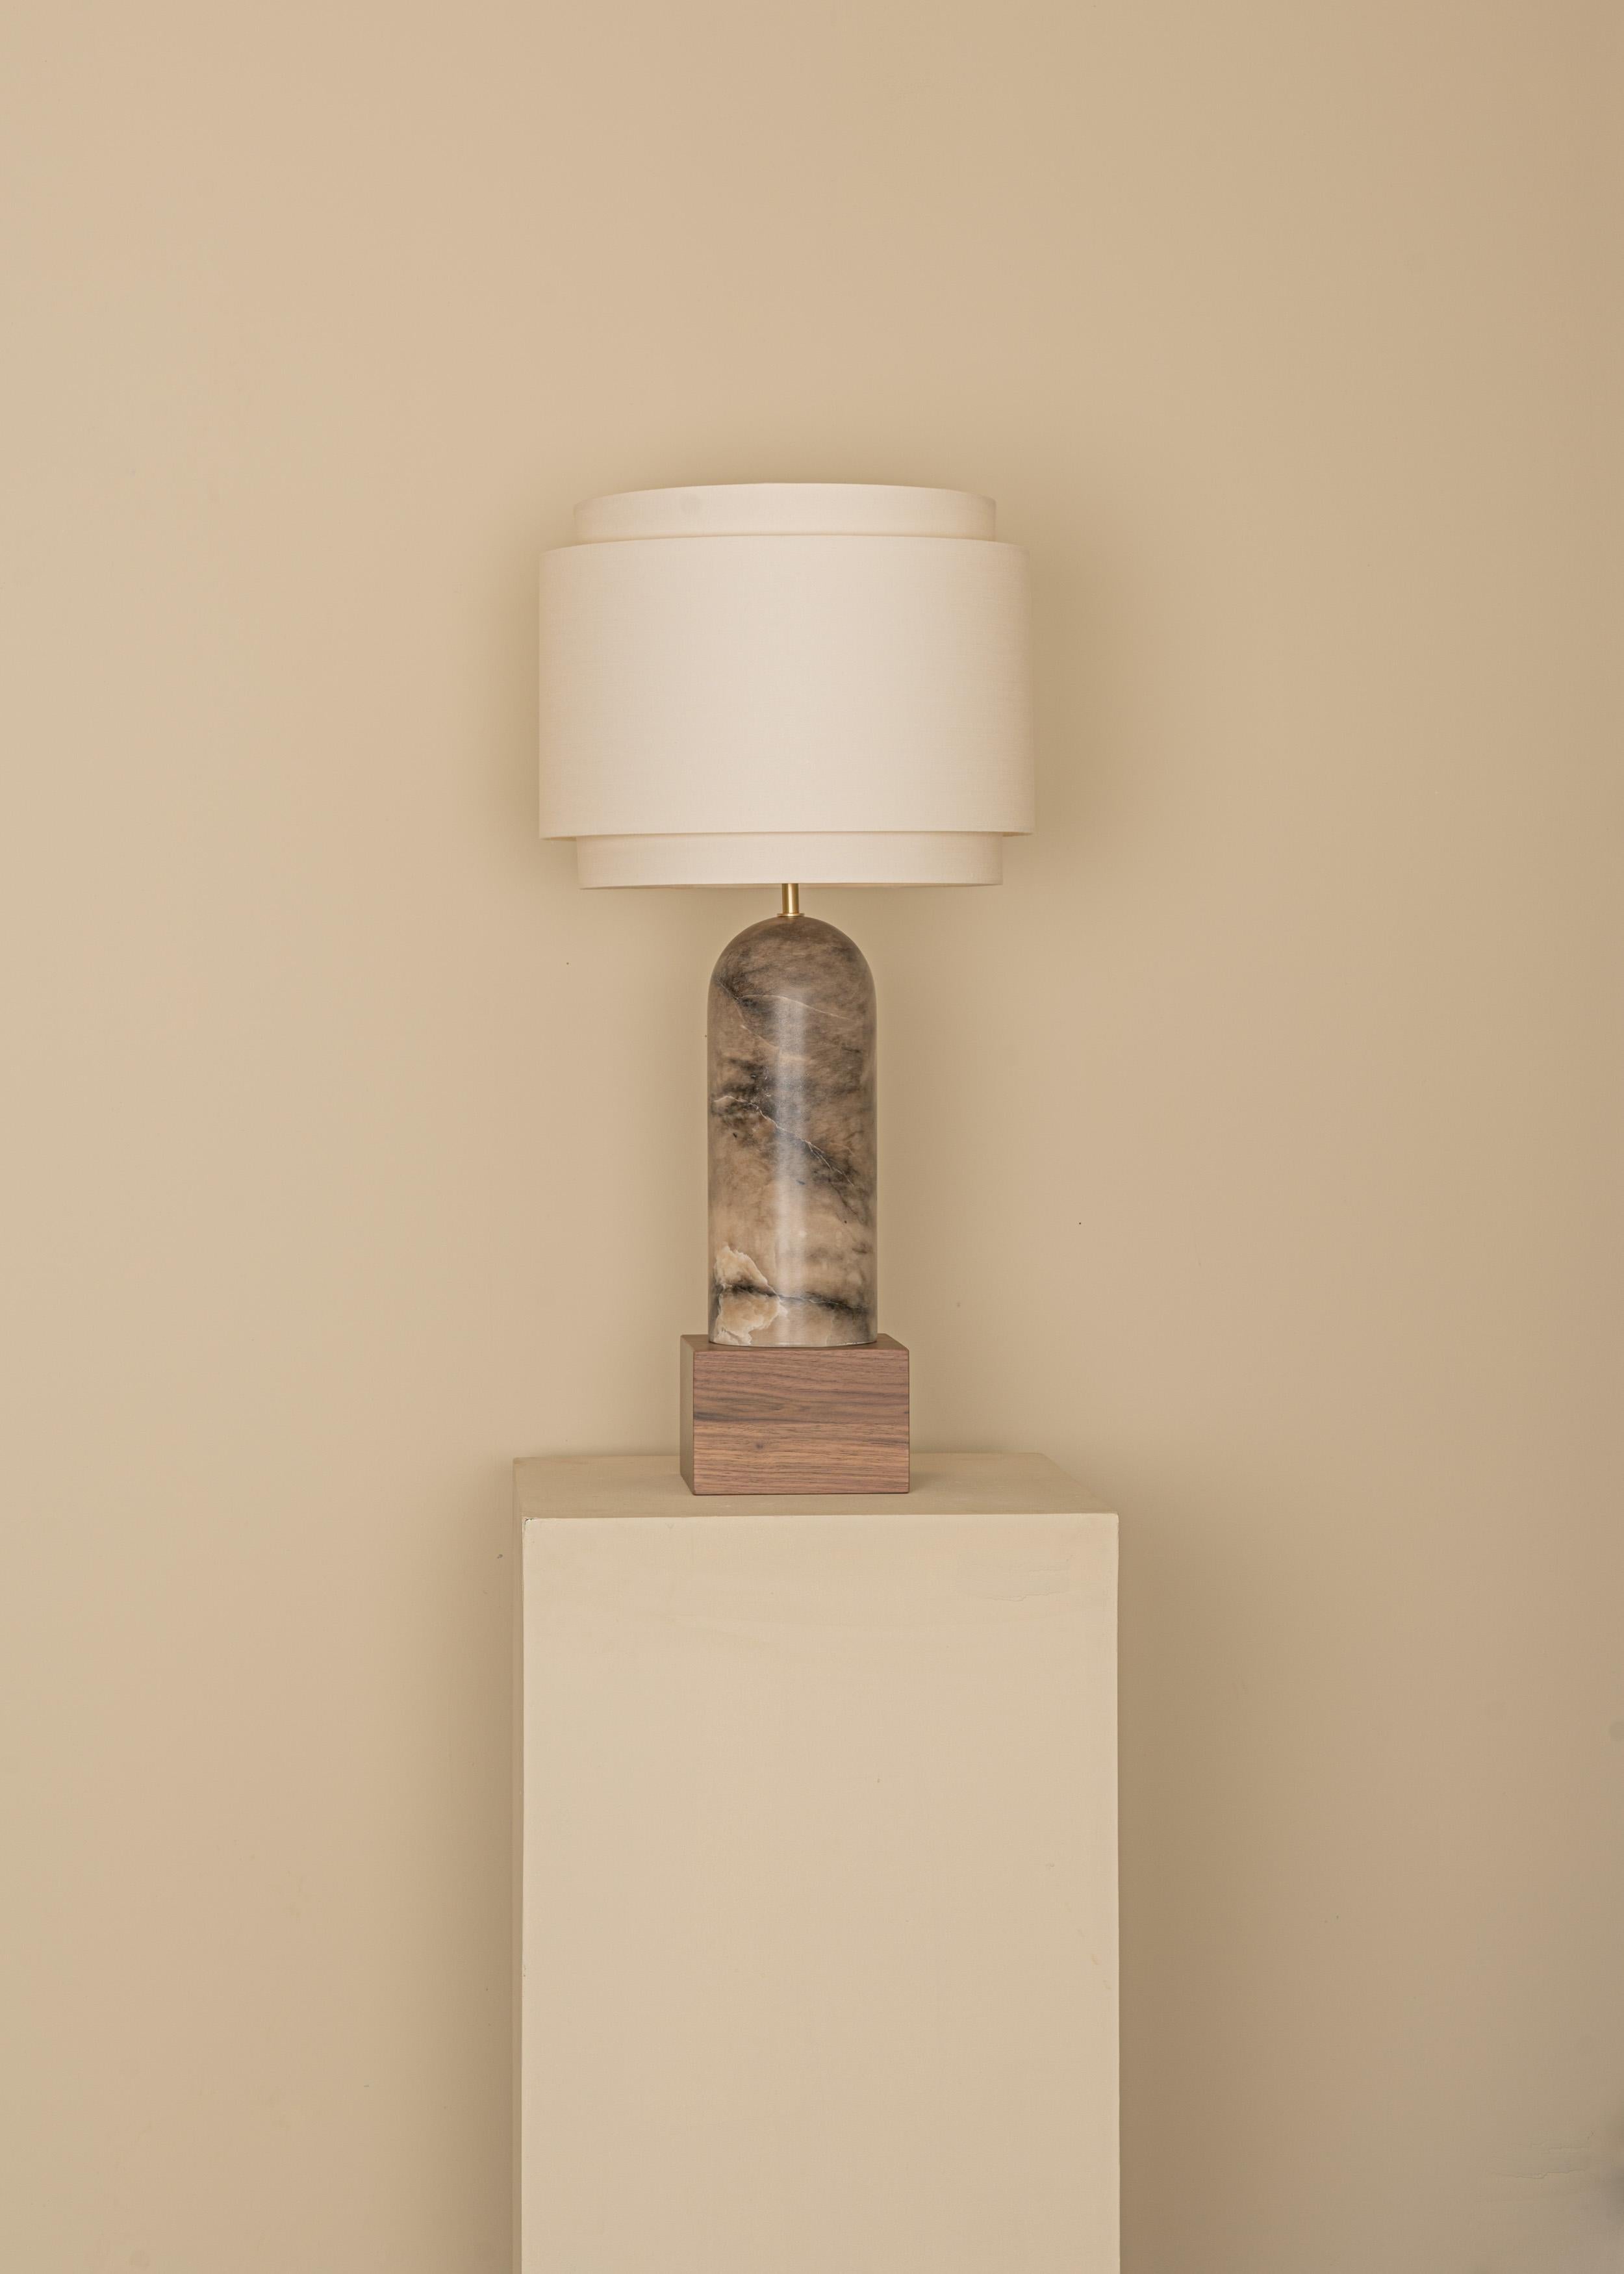 Tobacco Alabaster And Walnut Base Pura Kelo Double Table Lamp by Simone & Marcel
Dimensions: D 35 x W 35 x H 69 cm.
Materials: Brass, cotton, walnut and tobacco alabaster.

Also available in different marble, wood and alabaster options and finishes.